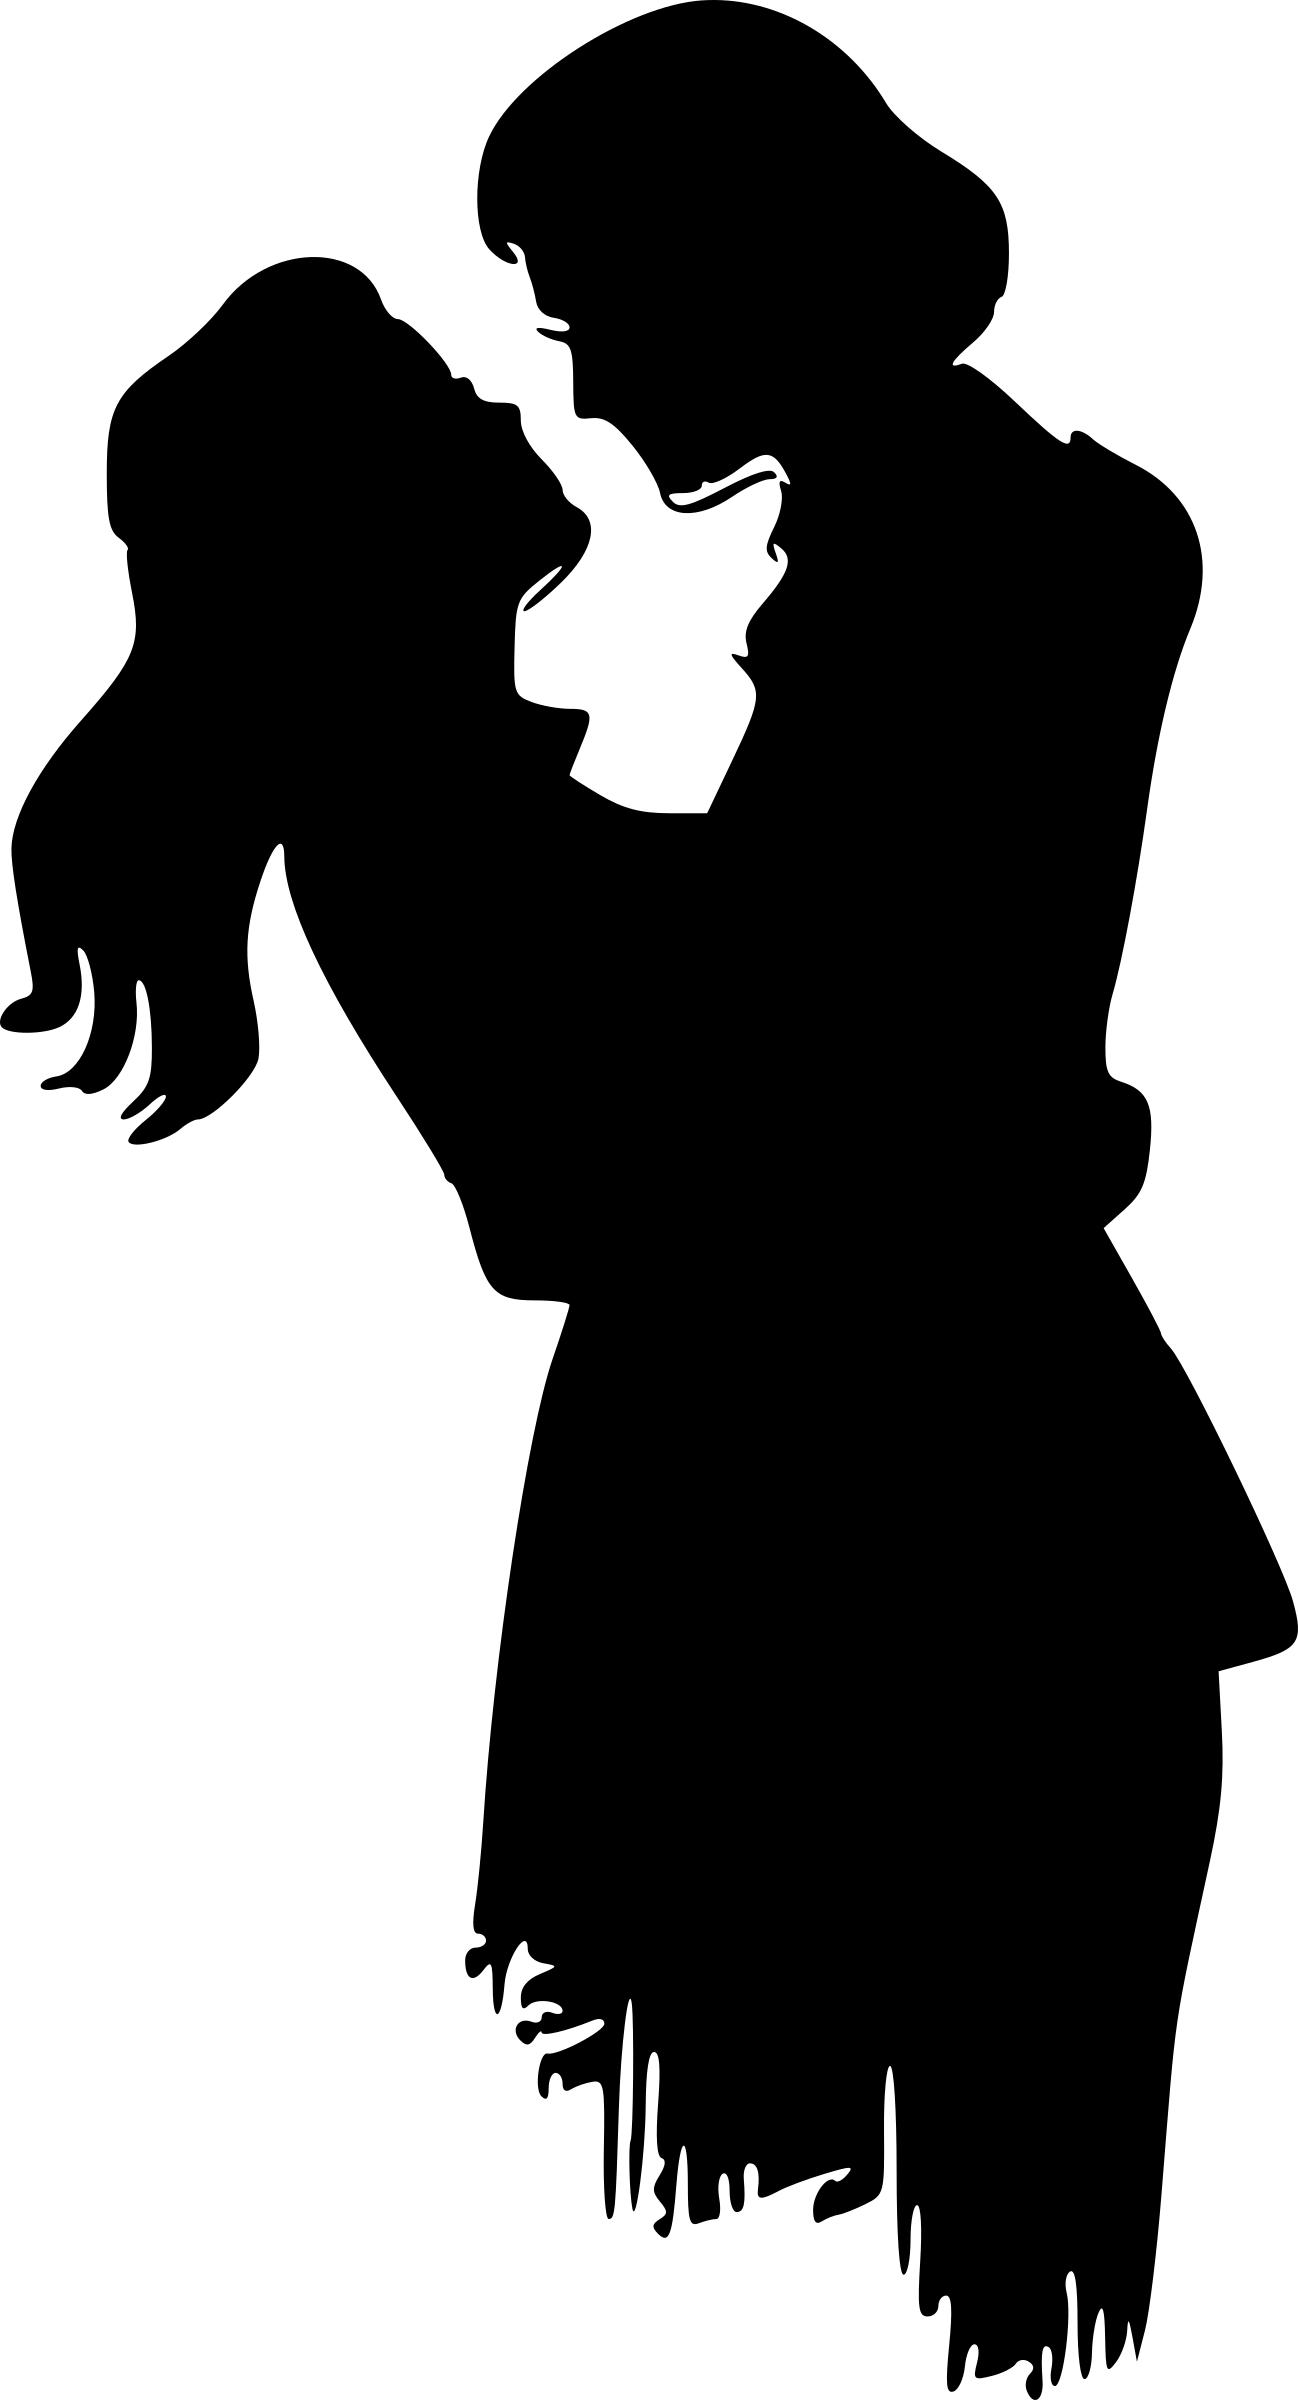 Lovers silhouette png